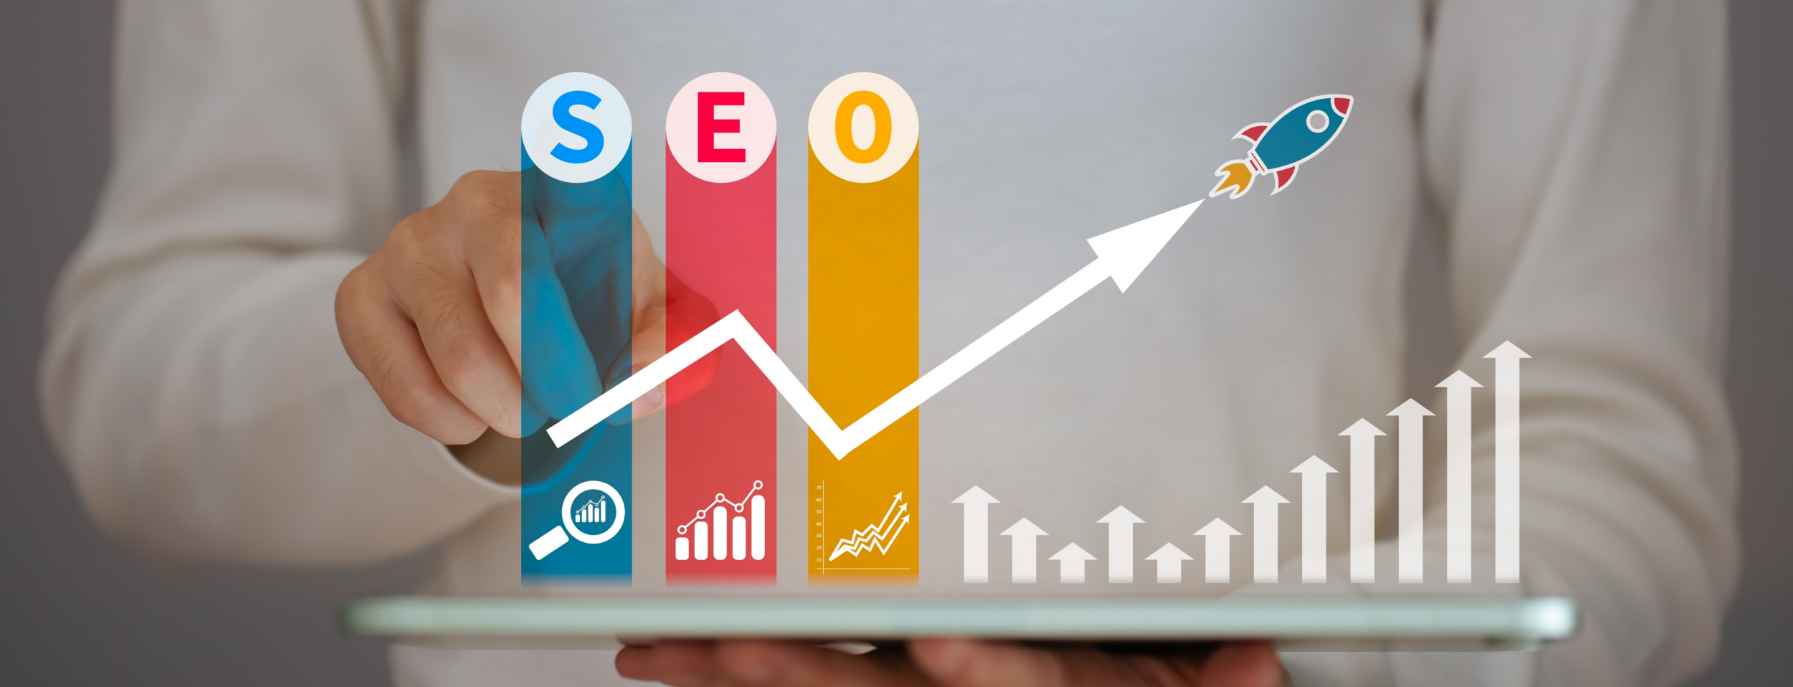 How to Boost Your Search Engine Rankings?